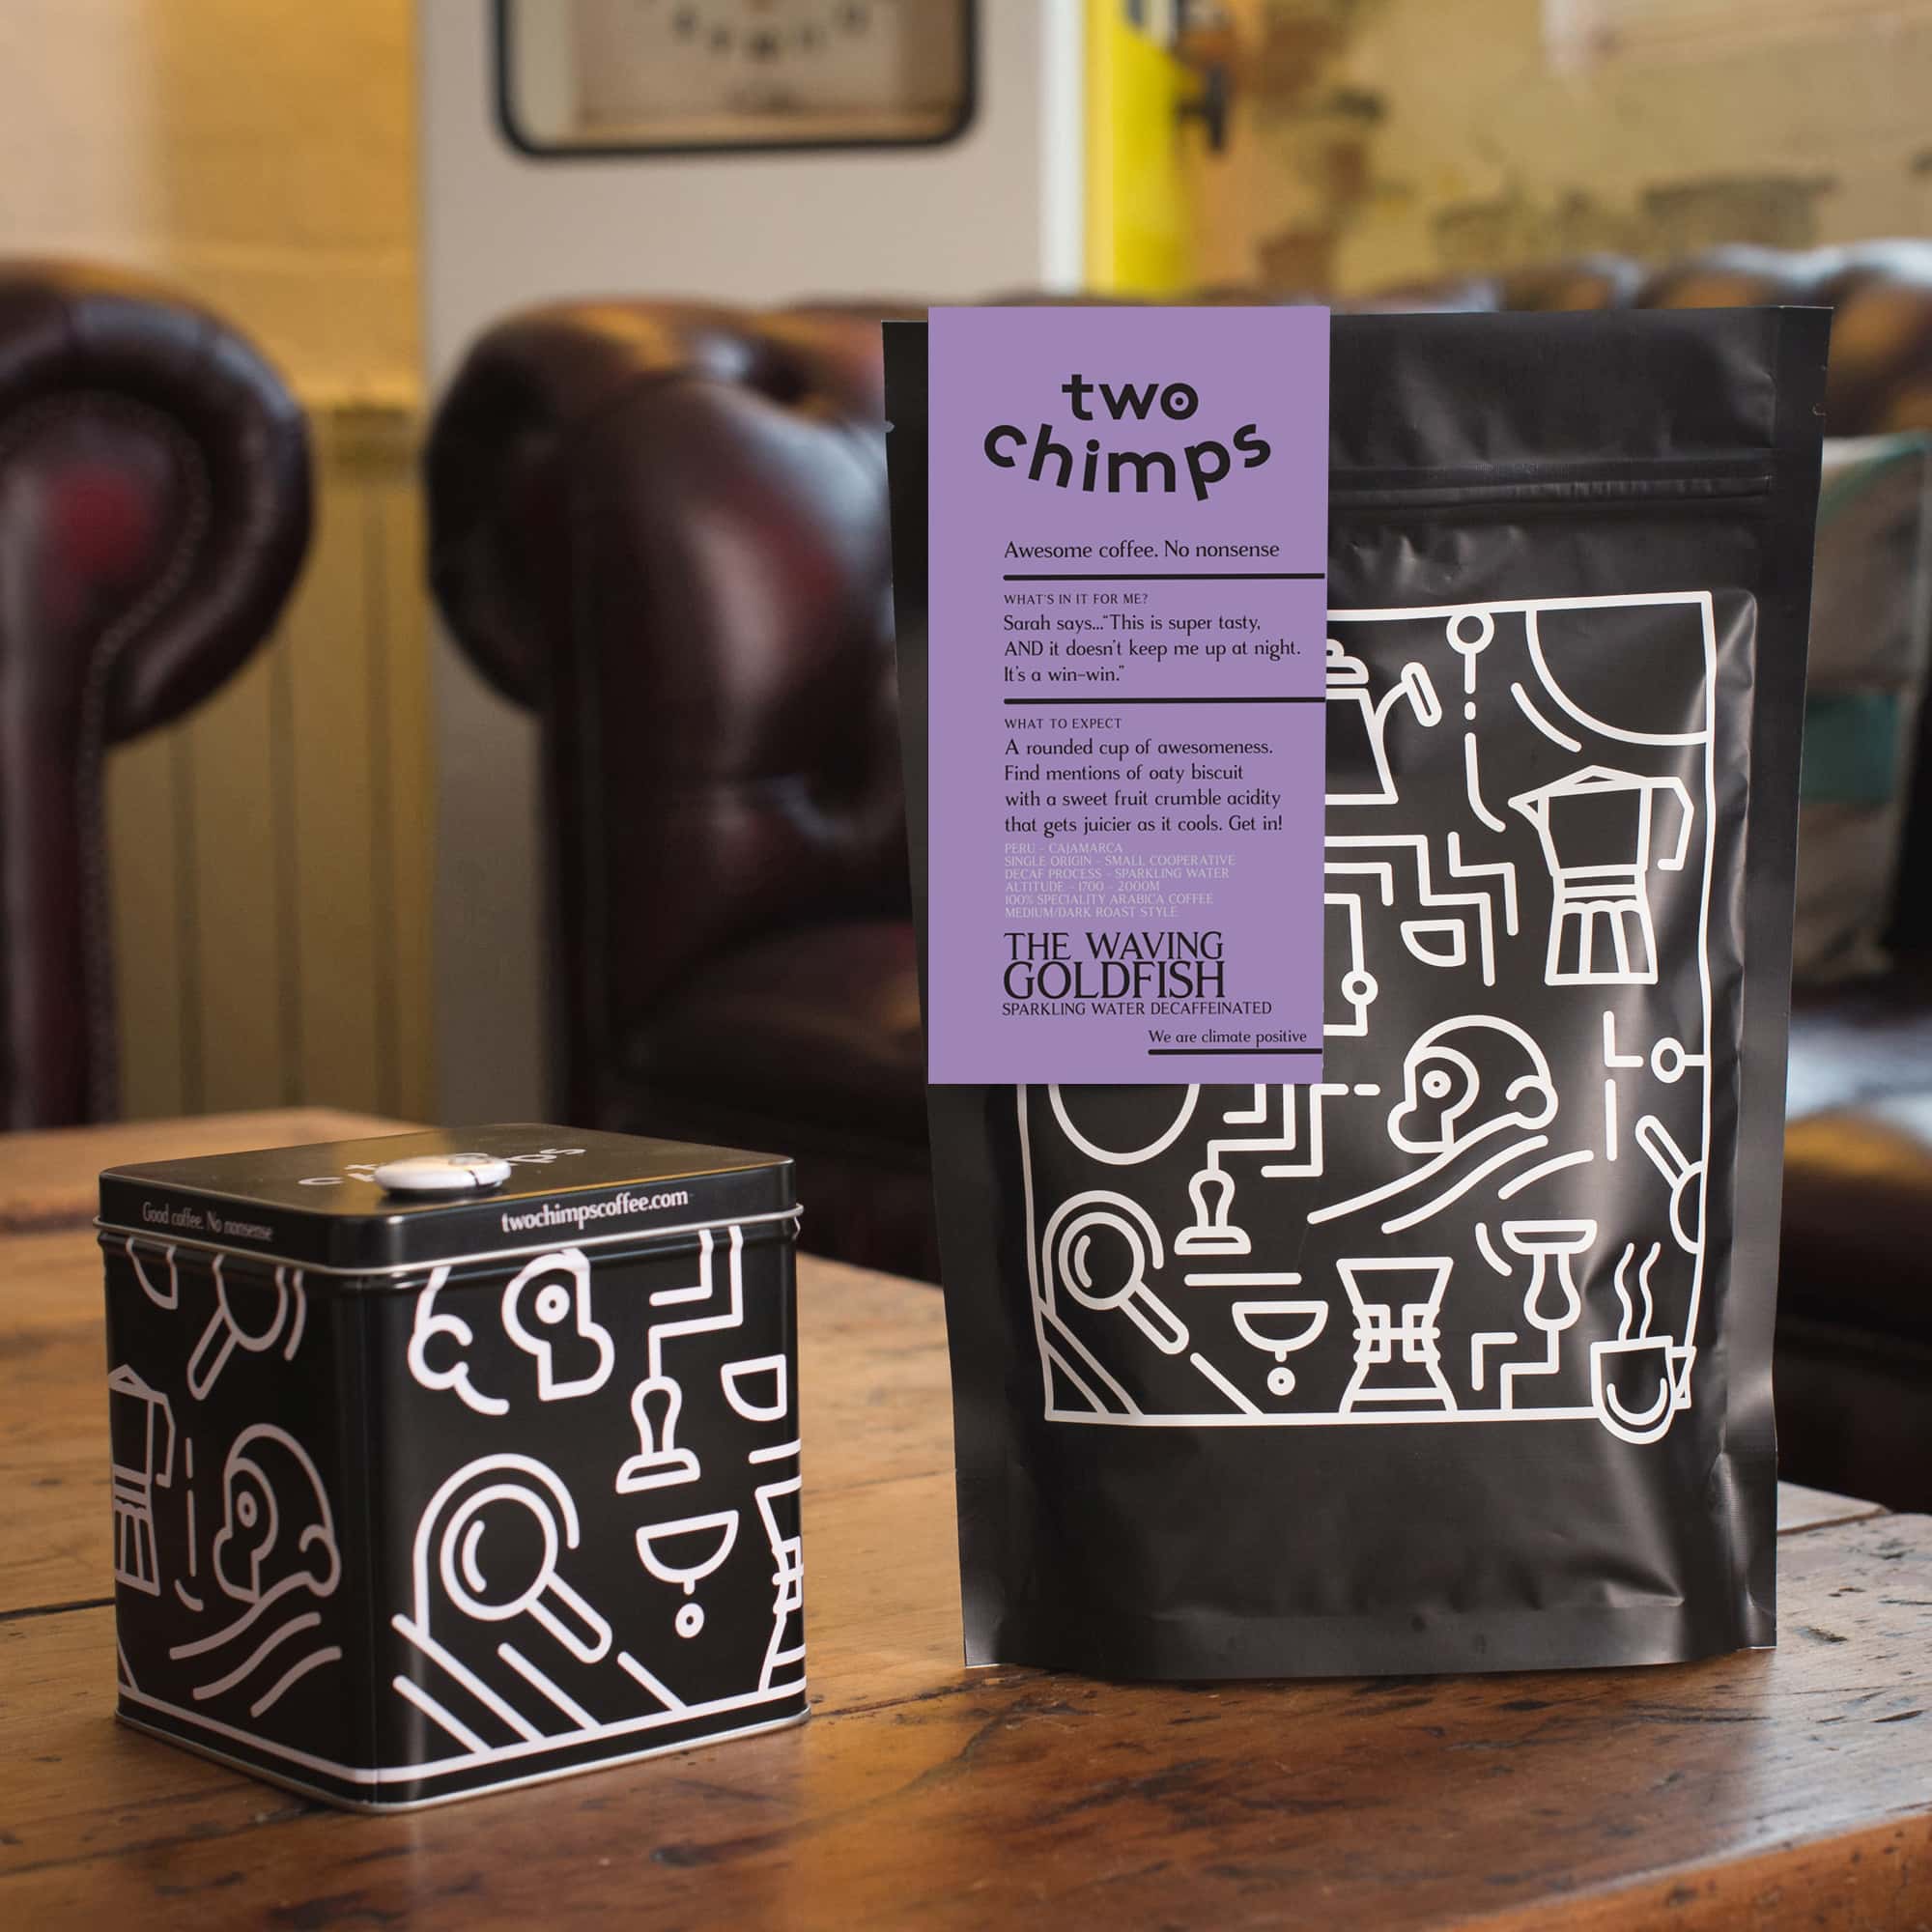 The waving goldfish bag and tin - two chimps coffee